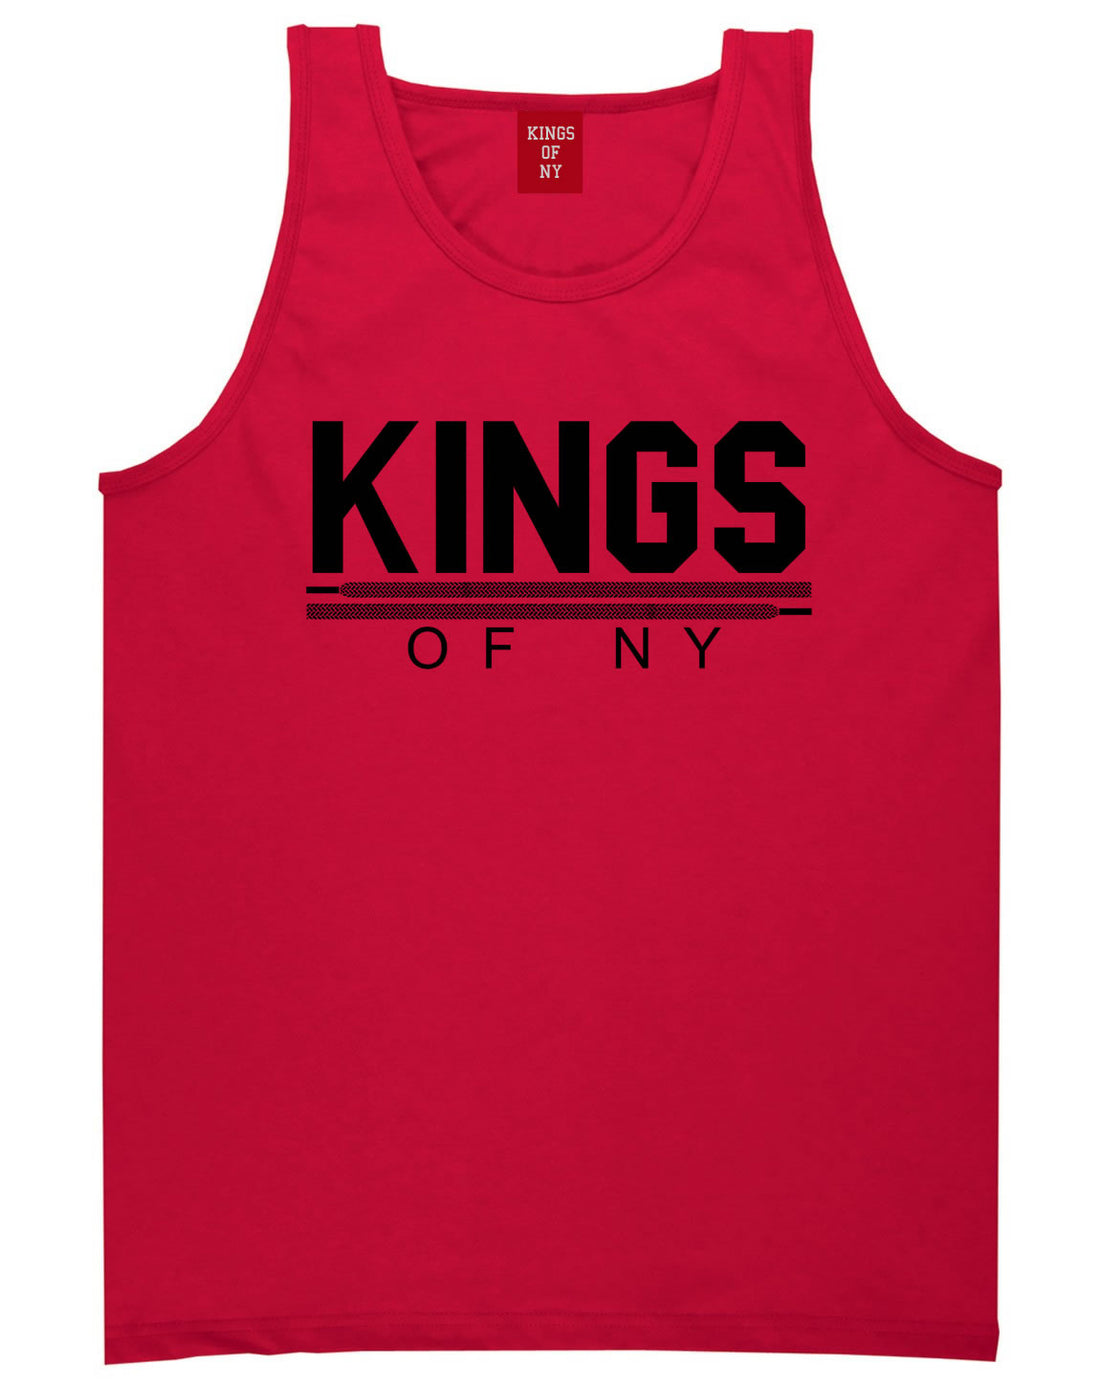 Kings Of NY Laces Tank Top in Red By Kings Of NY